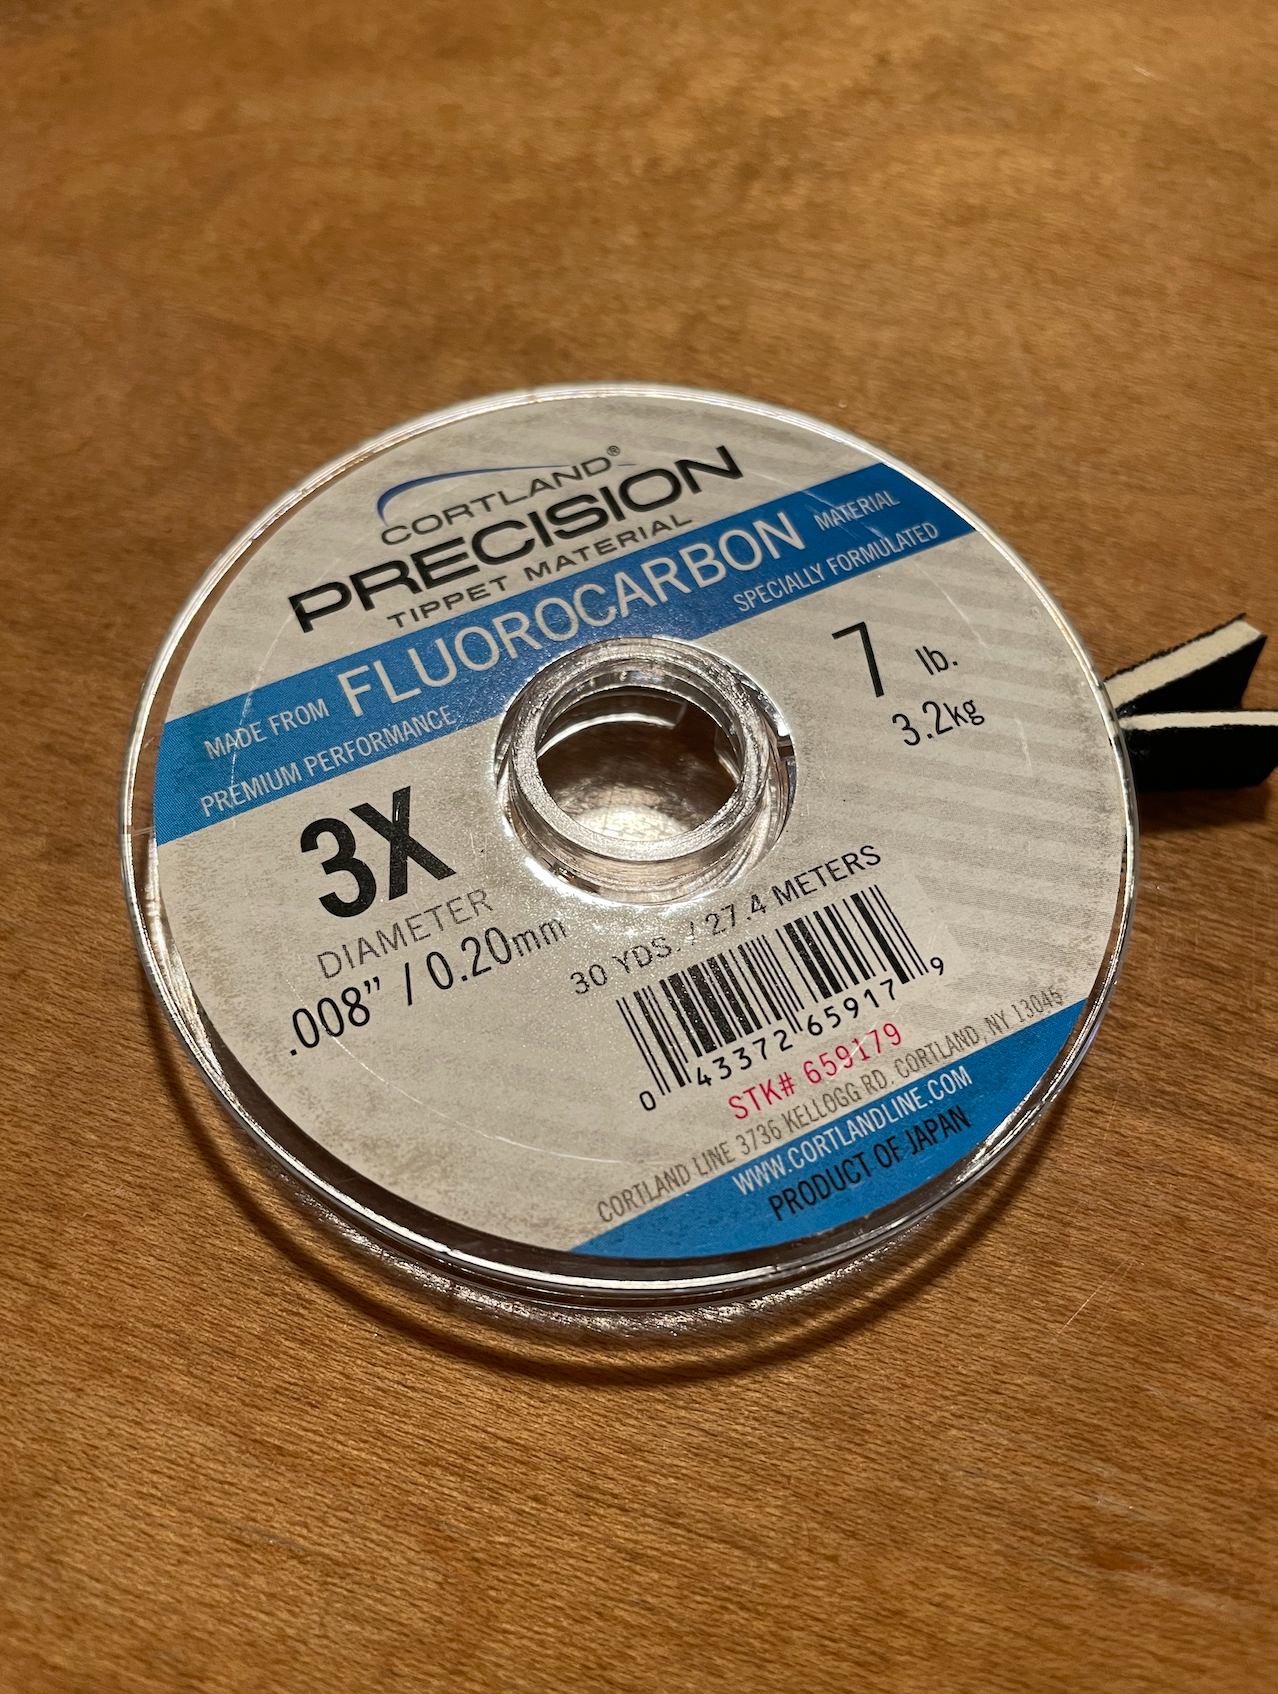 Precision Fluorocarbon Tippet Material